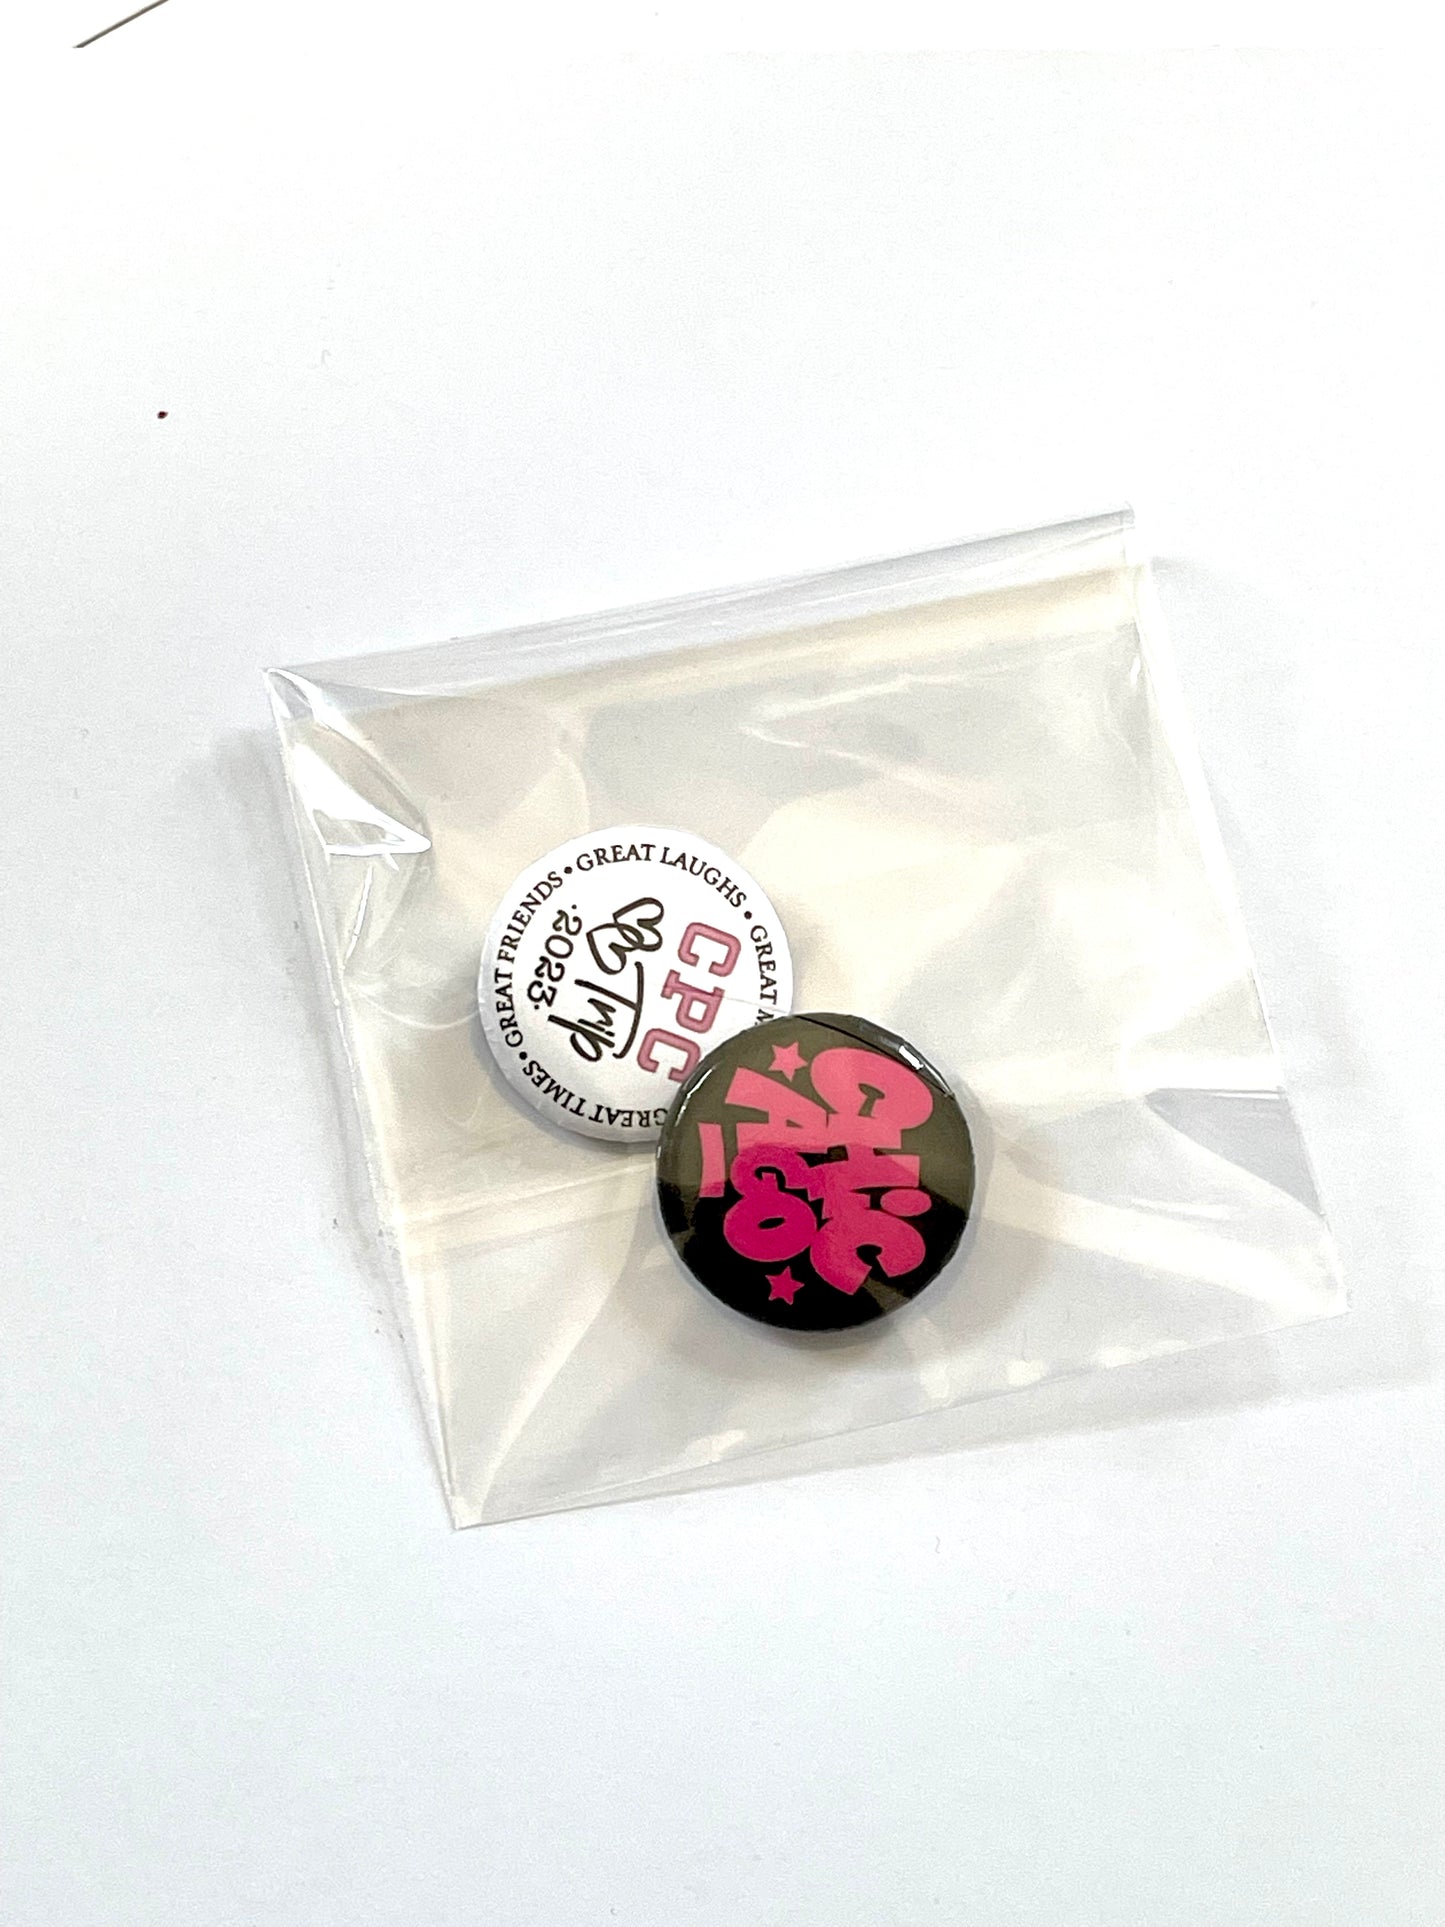 CHICAGO PLANNER CONFERENCE PIN PACK (PLEASE READ)